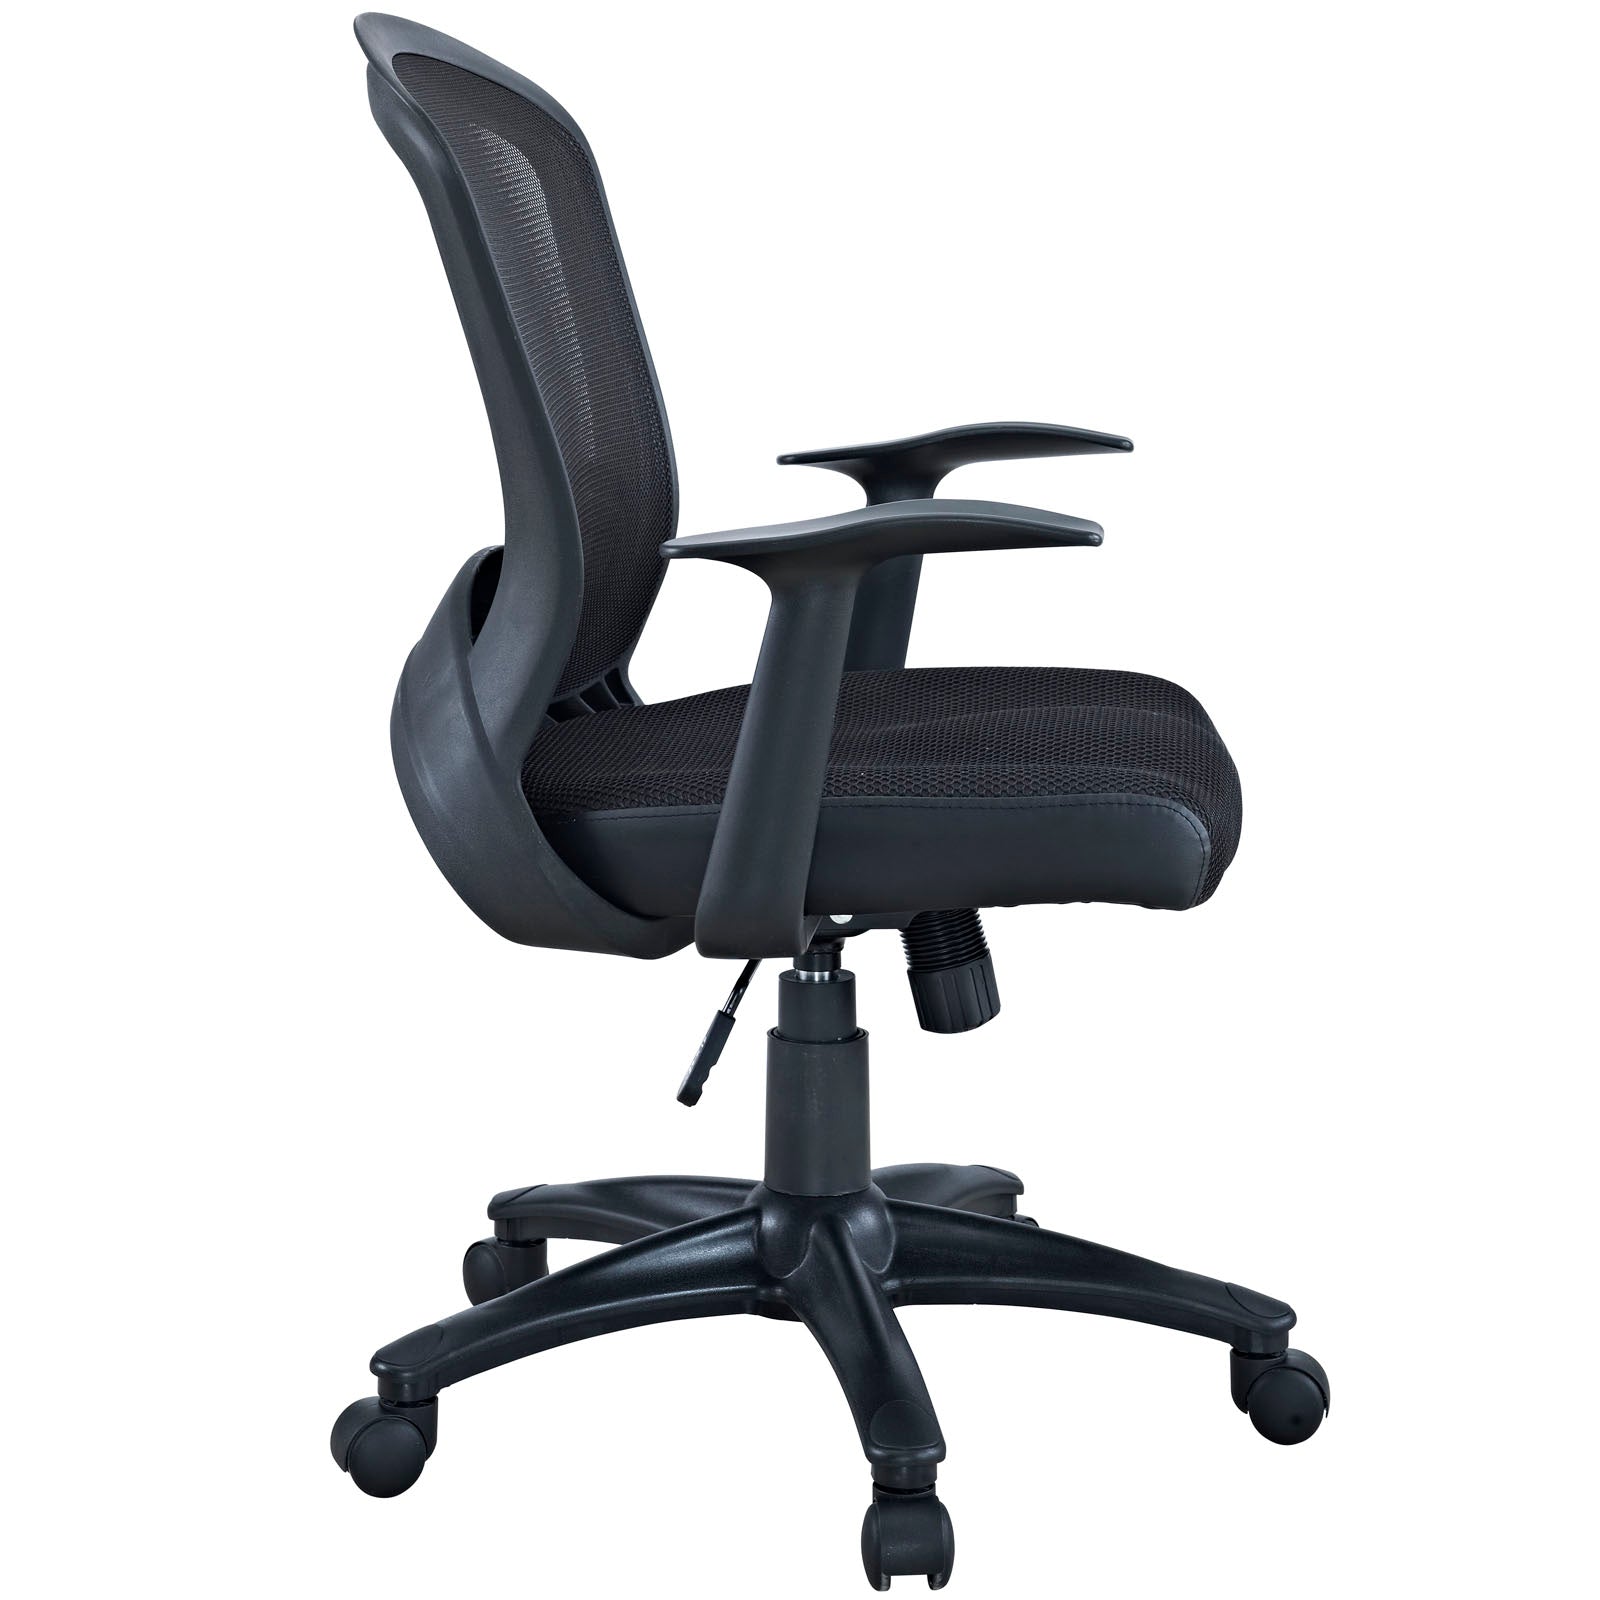 Pulse Mesh Office Chair